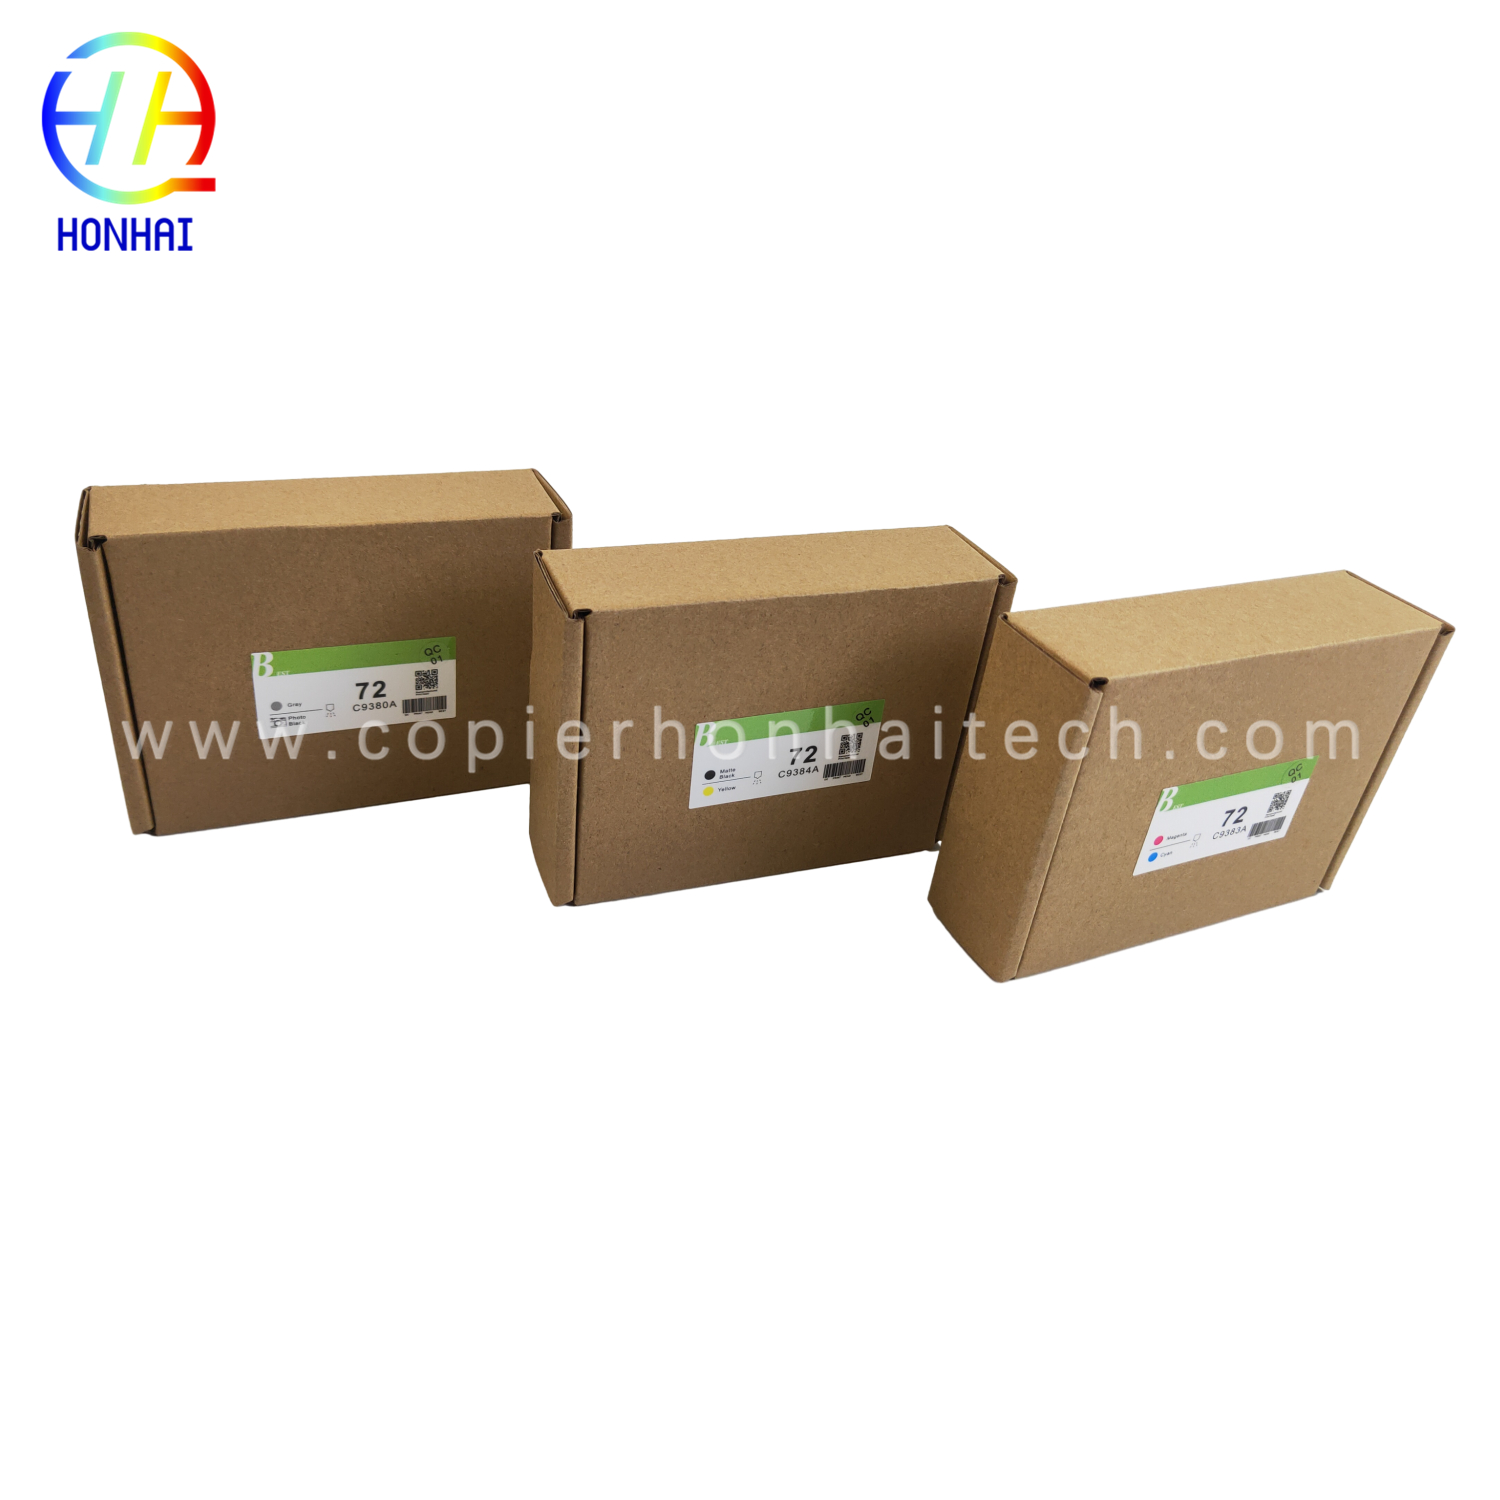 https://www.copierhonhaitech.com/printing-head-for-hp-72-c9380a-designjet-t2300-gray-and-photo-black-c9383a-magenta-and-cyan-c9384a-matte-black-and- dalag nga produkto/